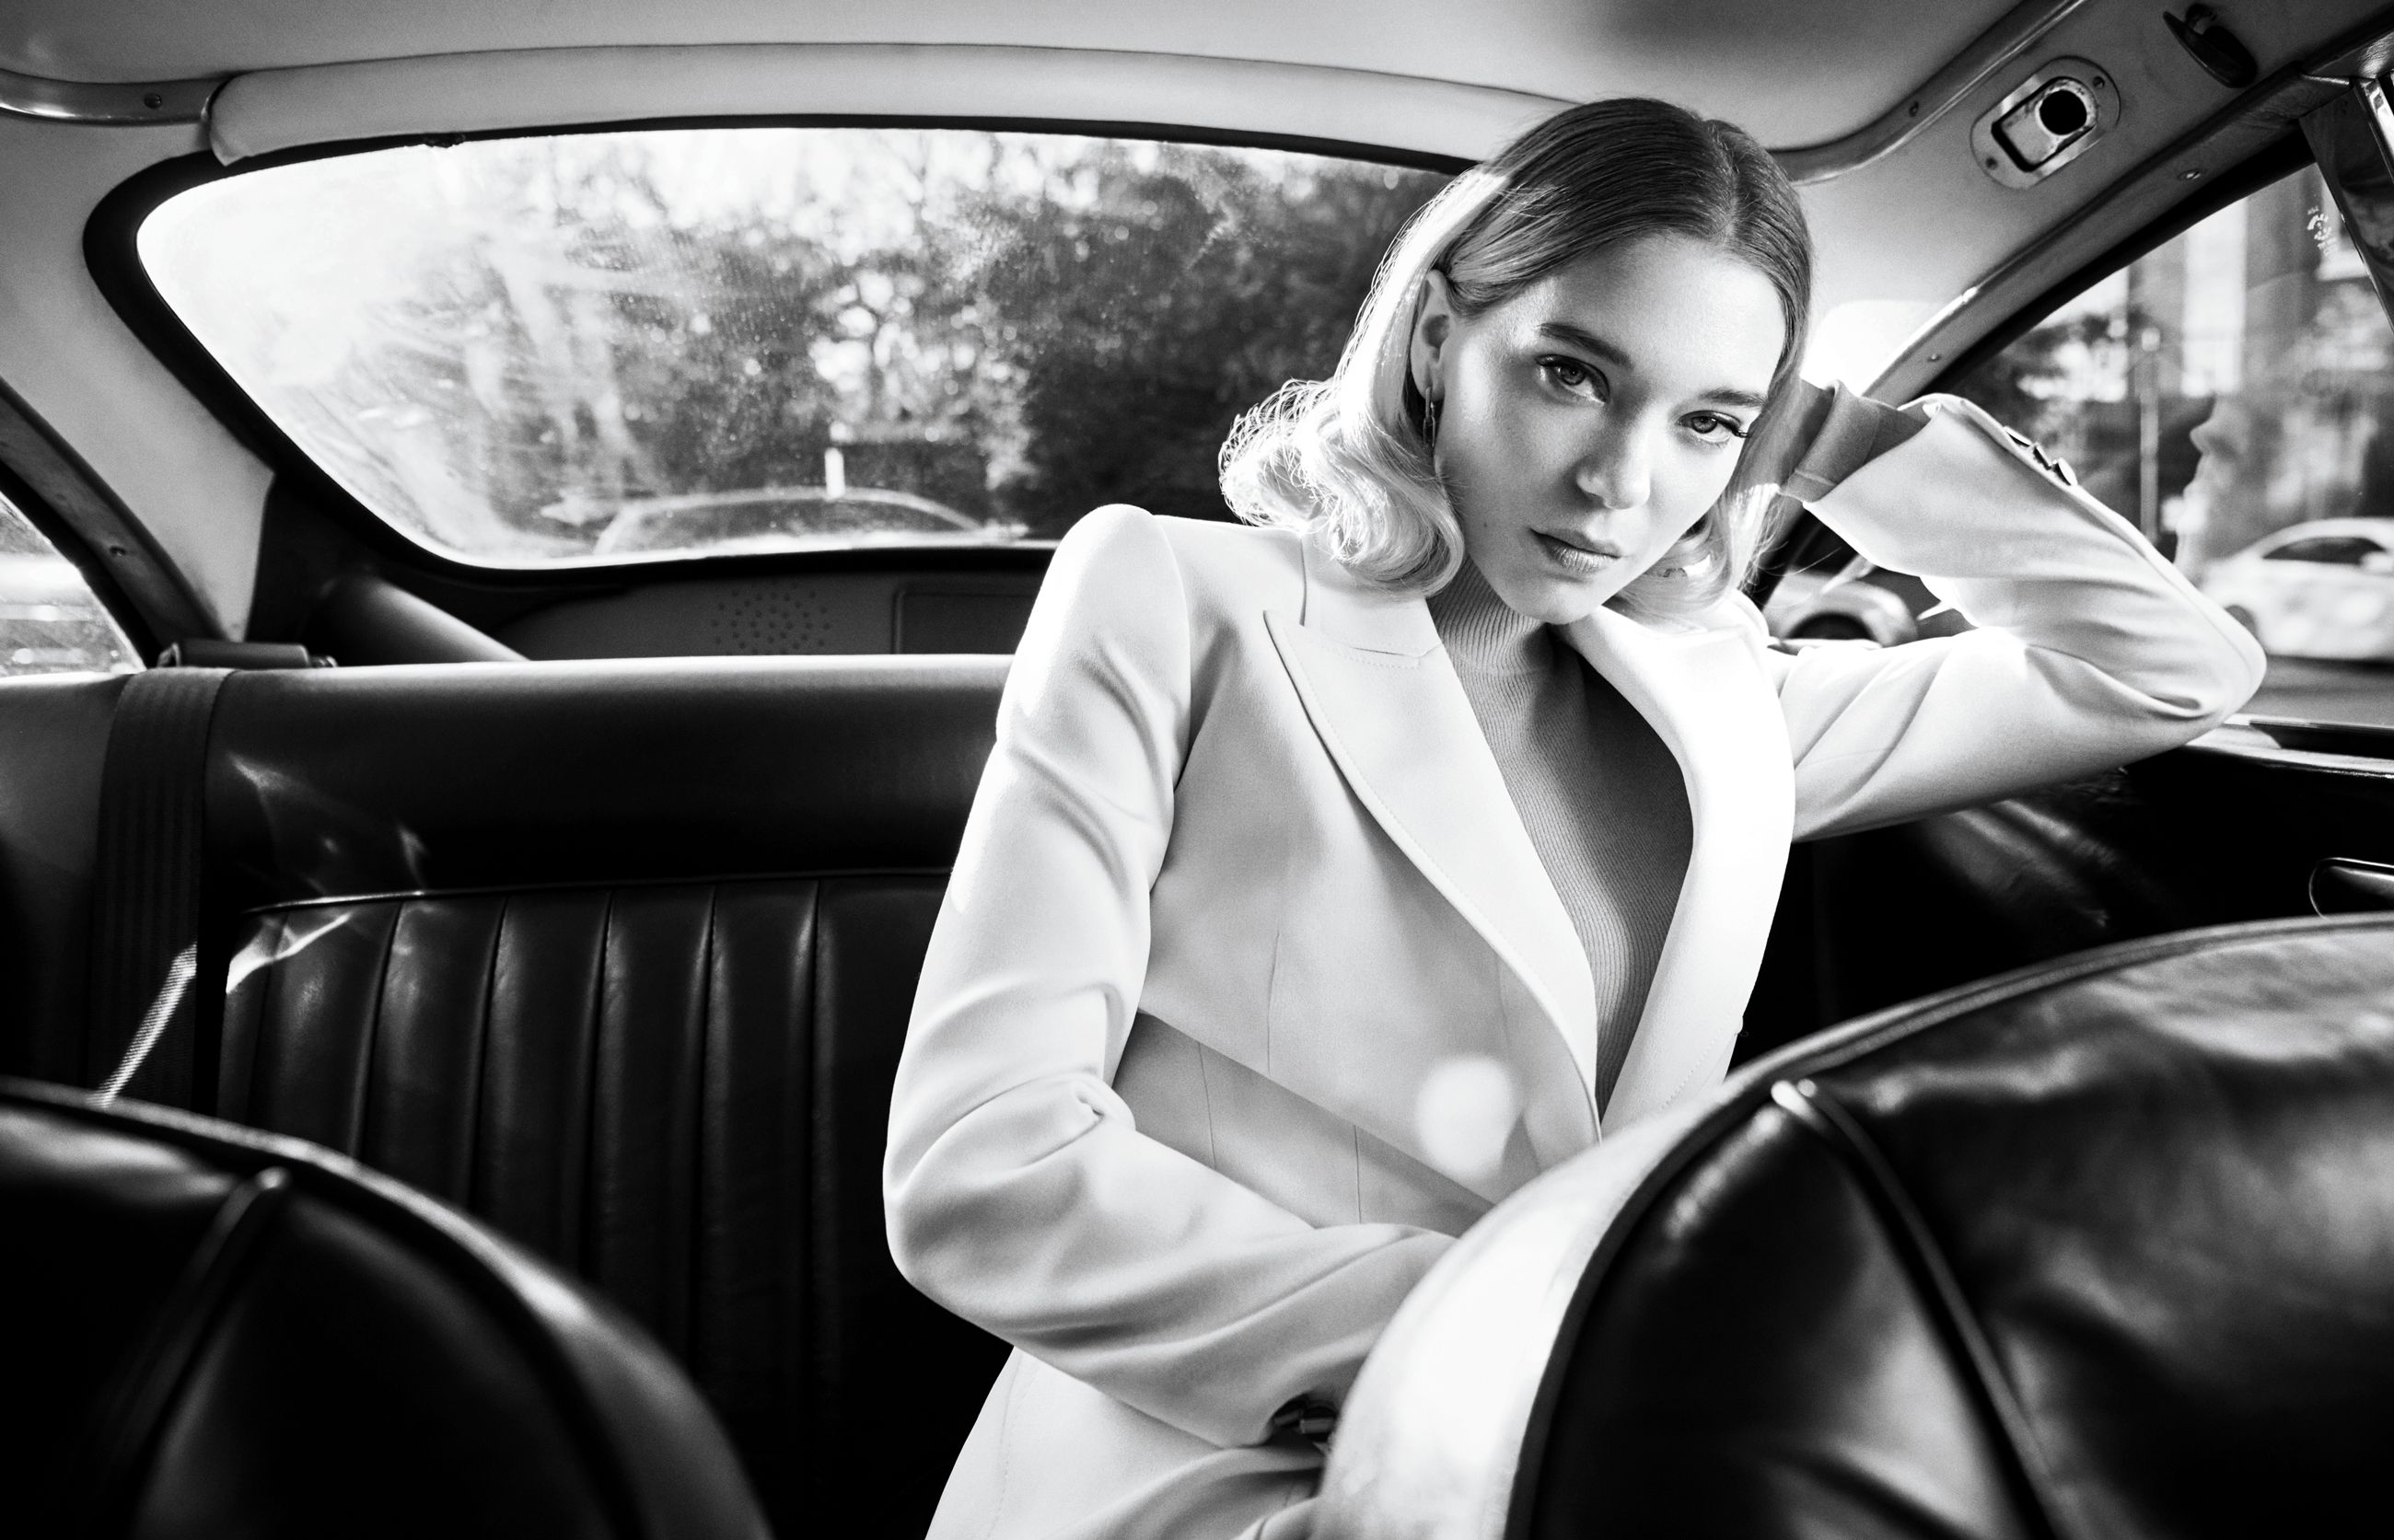 Léa Seydoux on 'No Time to Die' and More - The New York Times